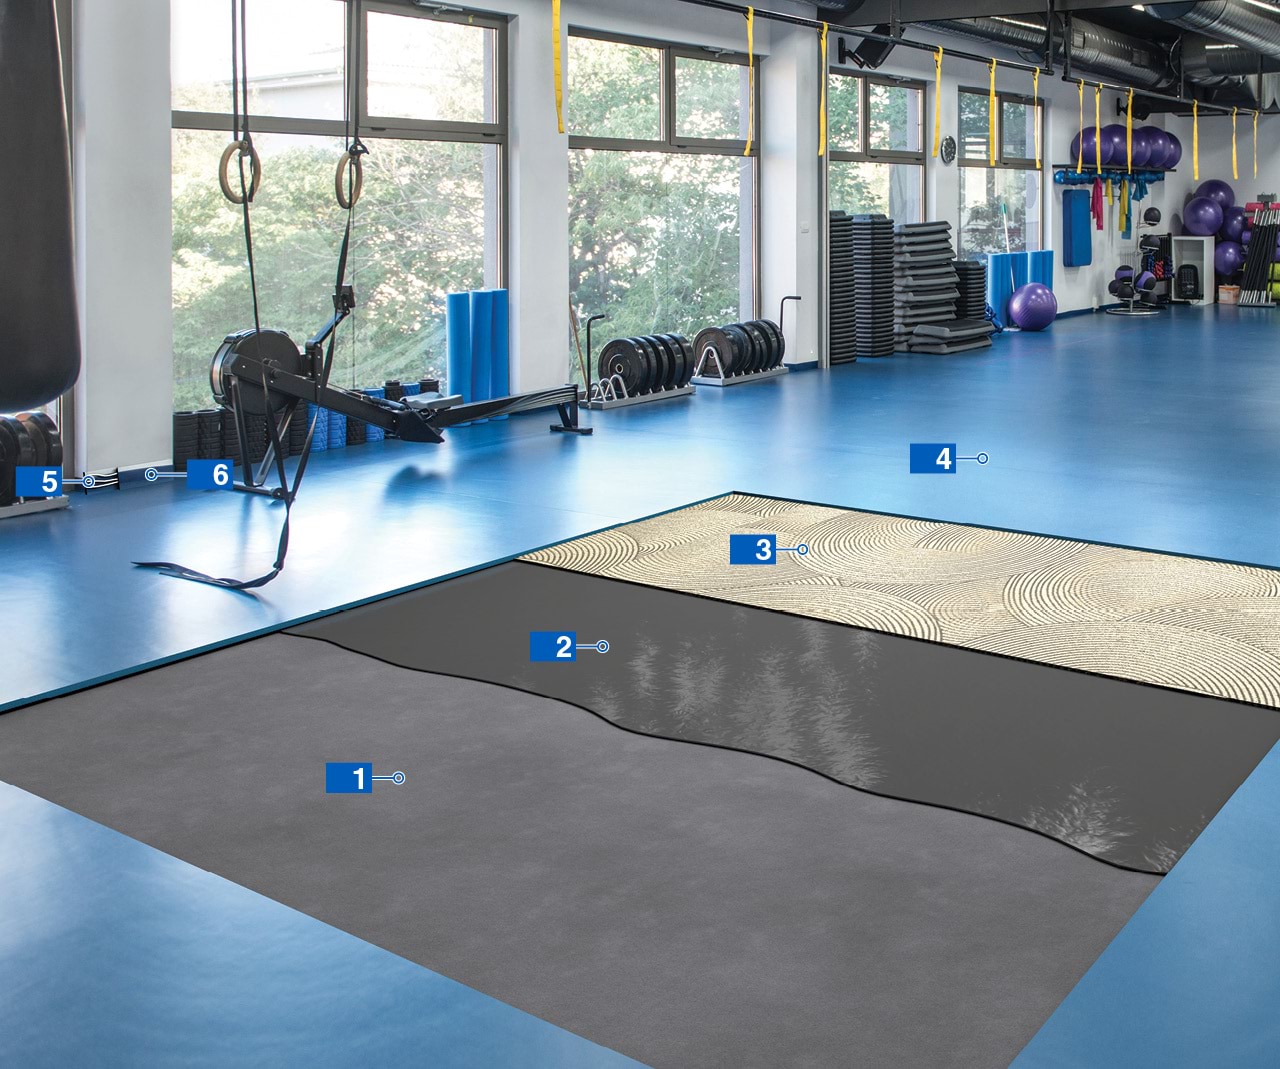 piso goma para gimnasio, piso goma para gimnasio Suppliers and  Manufacturers at